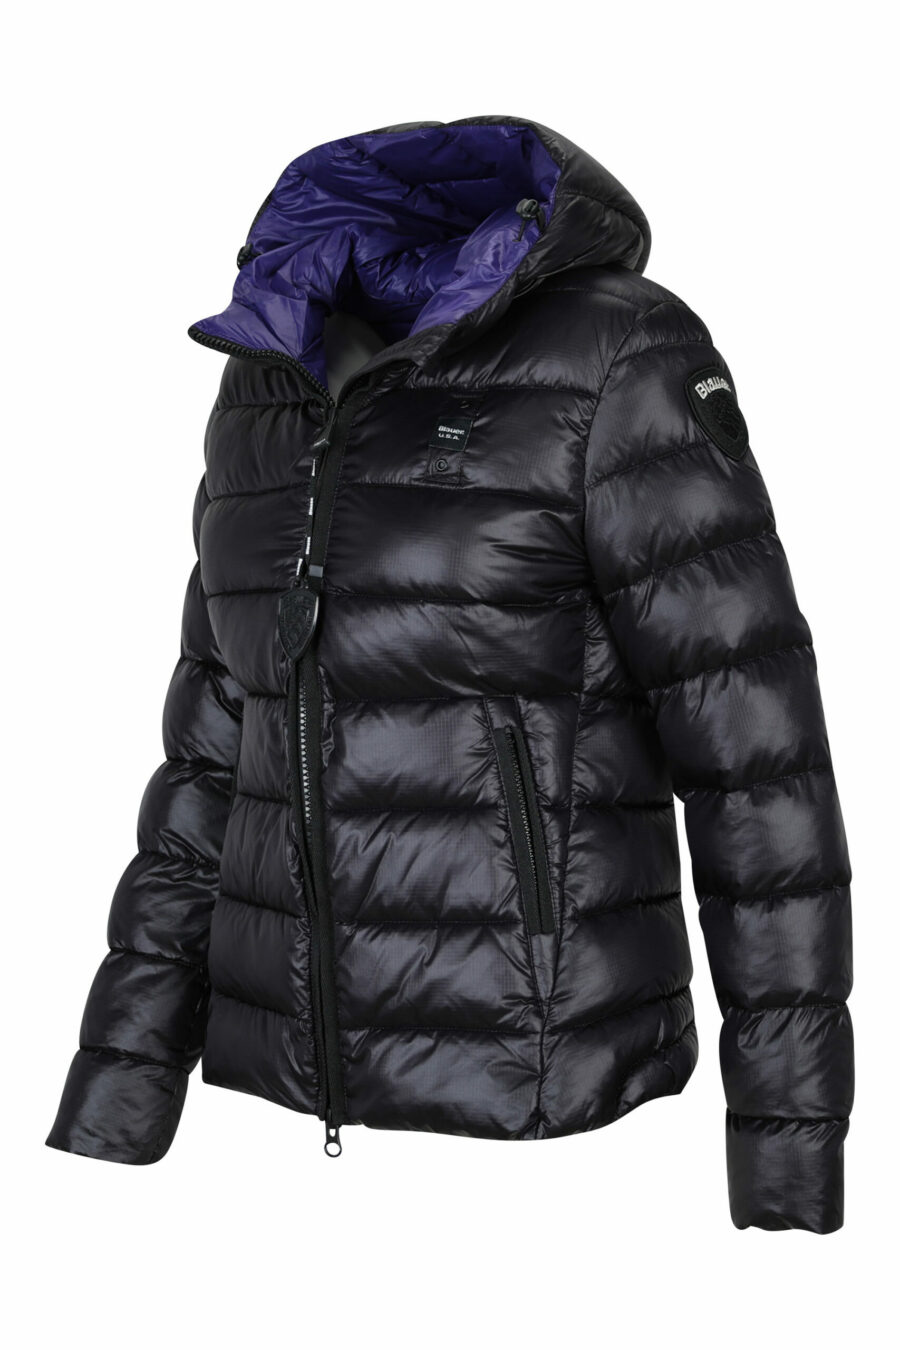 Black straight lined hooded jacket with purple inside with logo patch - 8058610683146 2 scaled